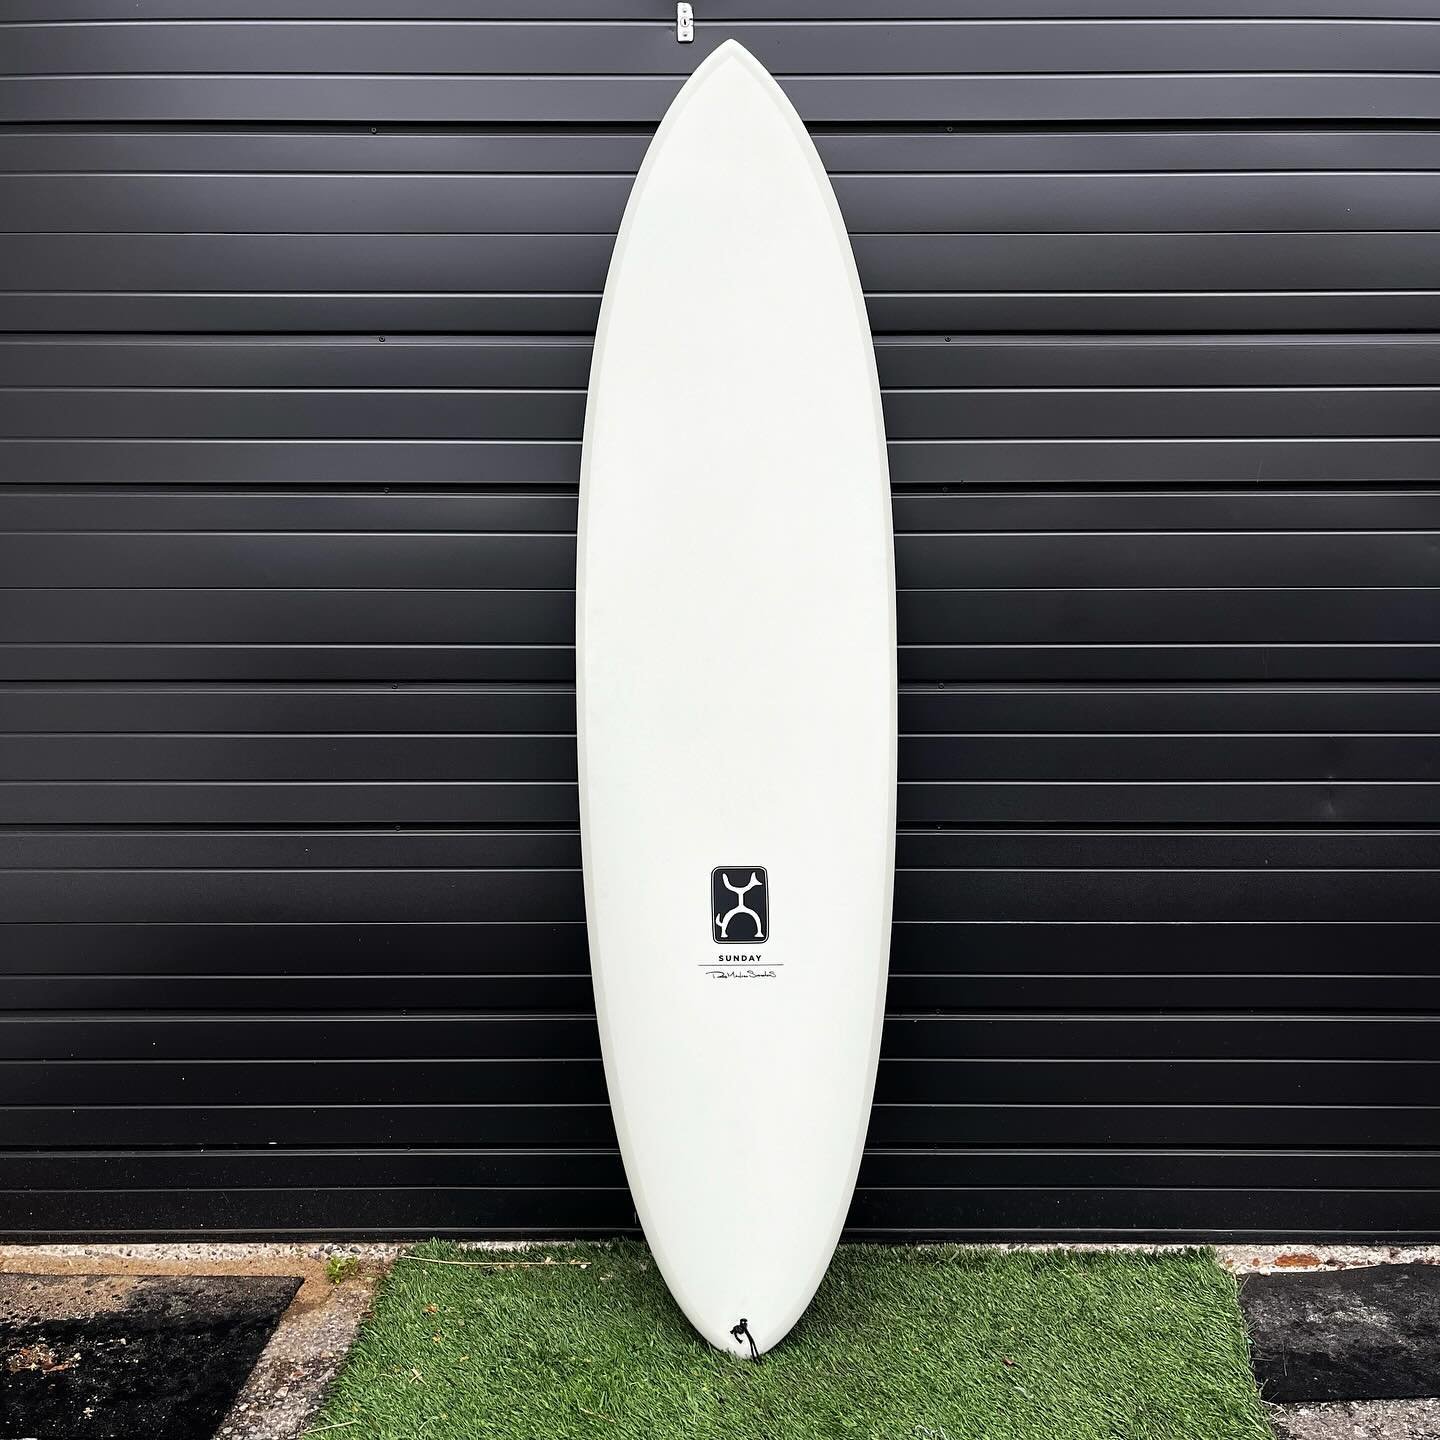 Used @firewiresurfboards Sunday
 Thunderbolt Red 
Like new condition

7&rsquo;3 x 21 7/8 x 3 1/8 @ 56.66L

-$700-